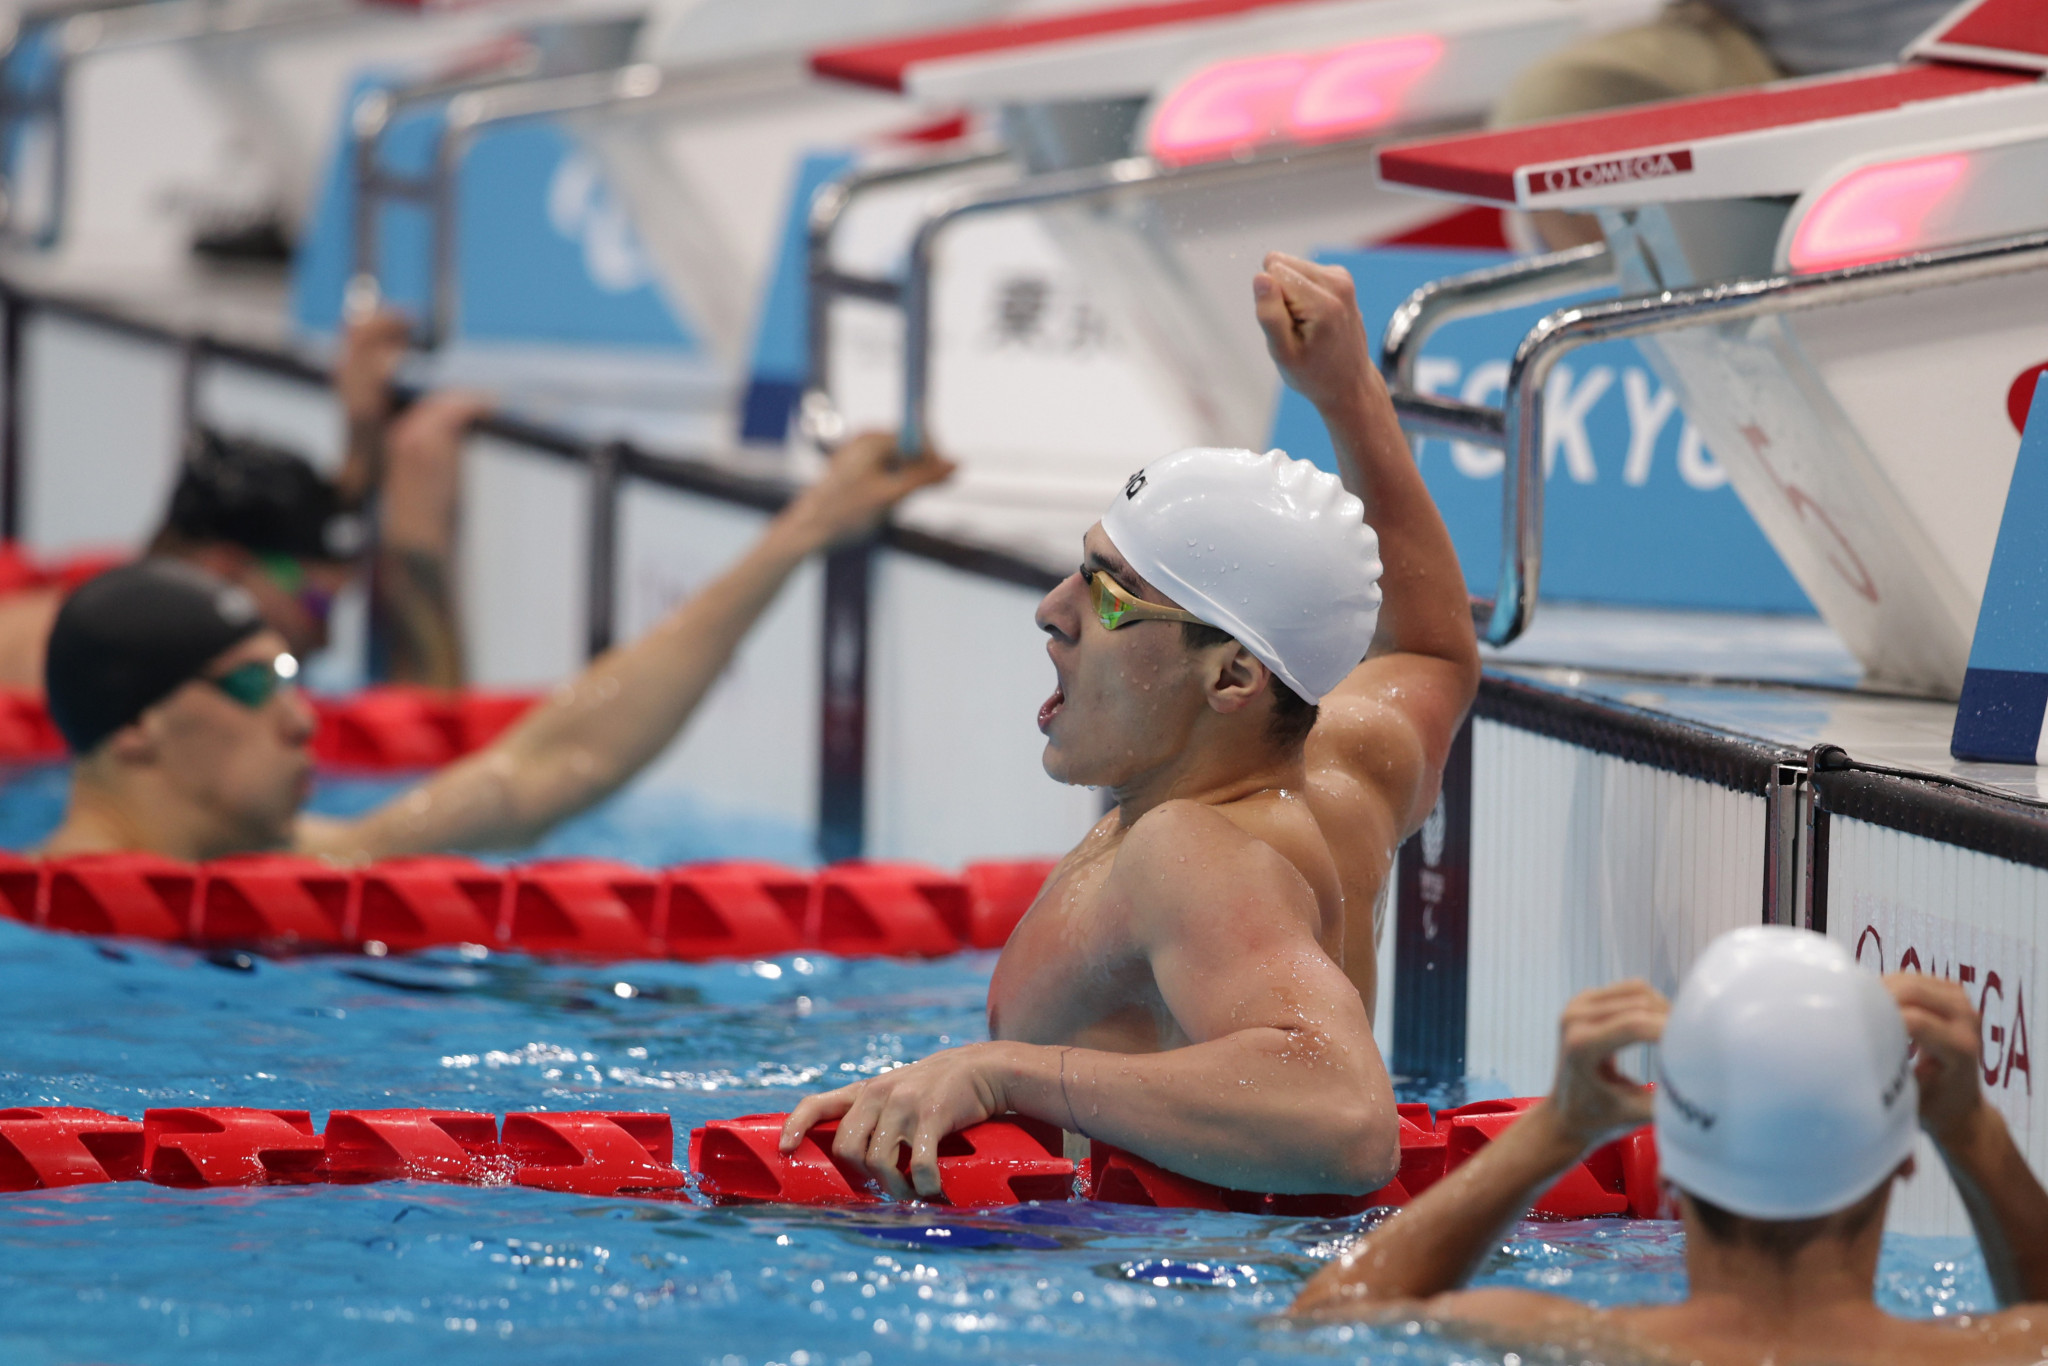 Vali Israfilov came from behind to beat Oleksii Fedyna in the men’s 100m breaststroke SB12 final ©Getty Images